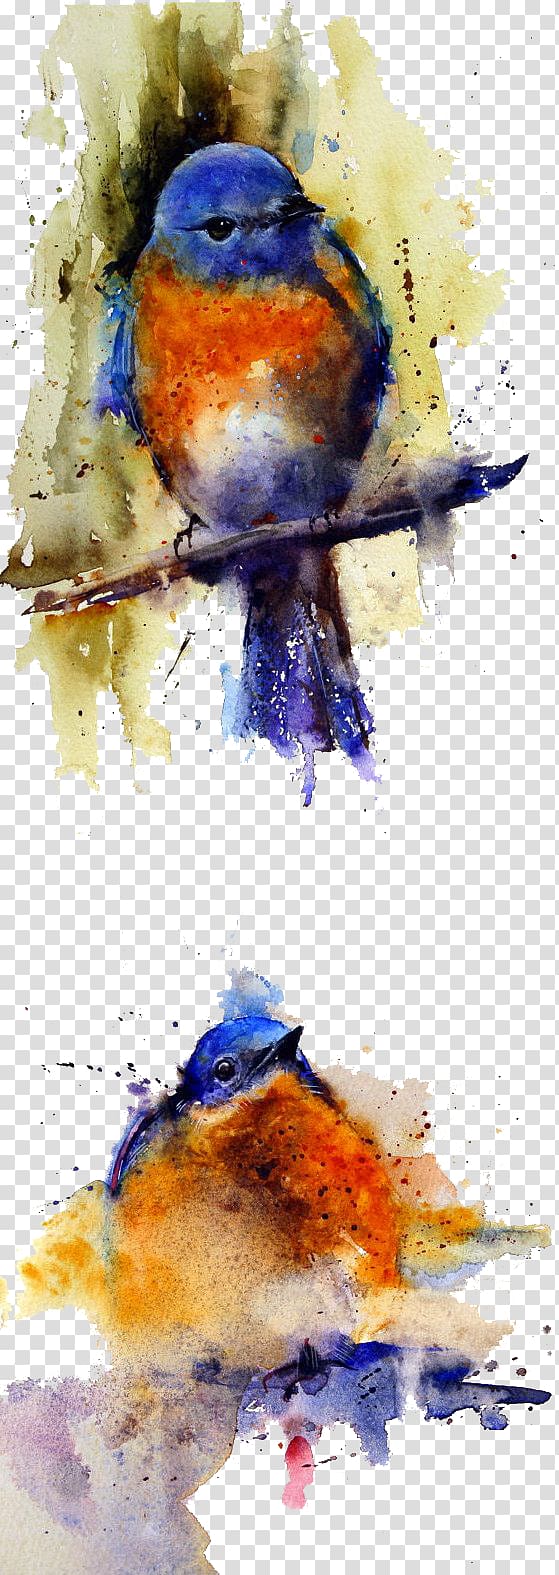 Watercolor: Animals Watercolor painting Artist Oil painting, Paintings sparrow transparent background PNG clipart